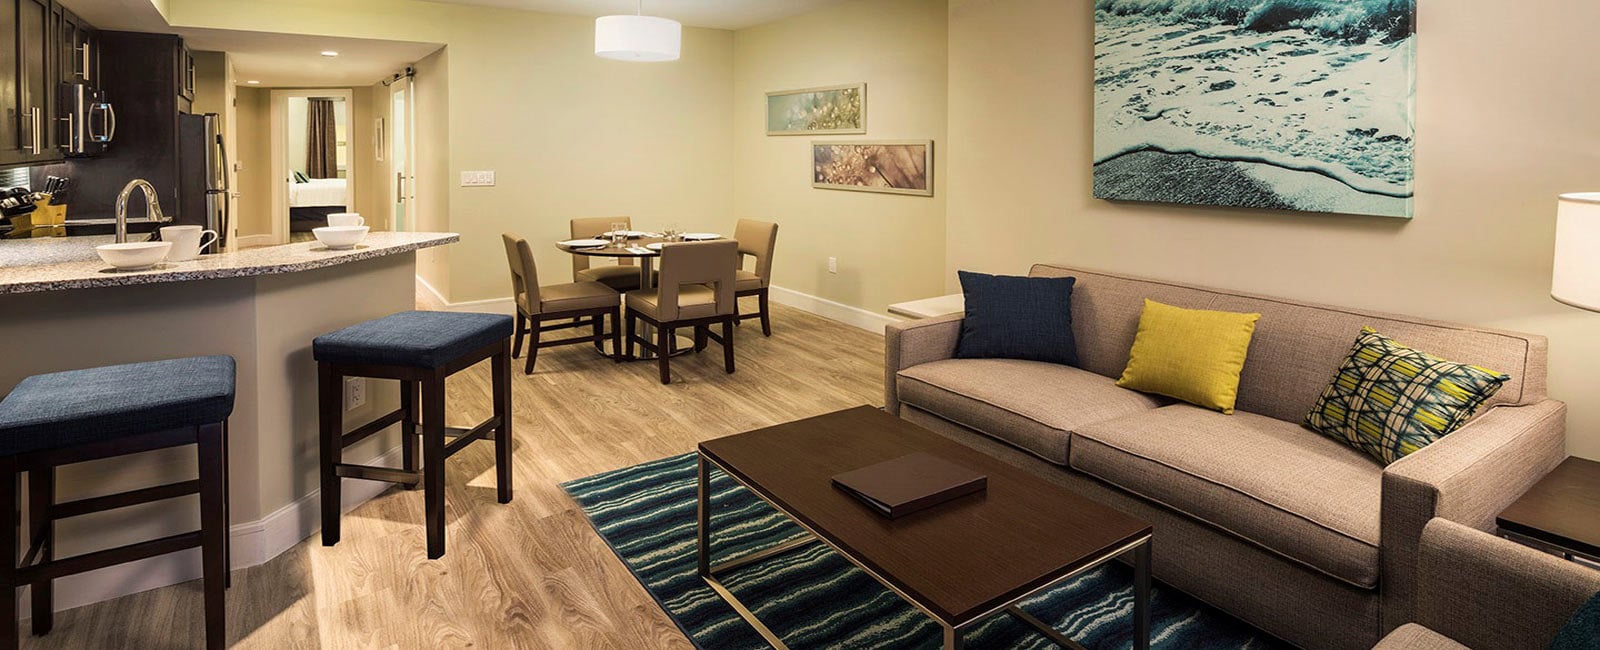 Living Area at Ocean 22 in Myrtle Beach, South Carolina